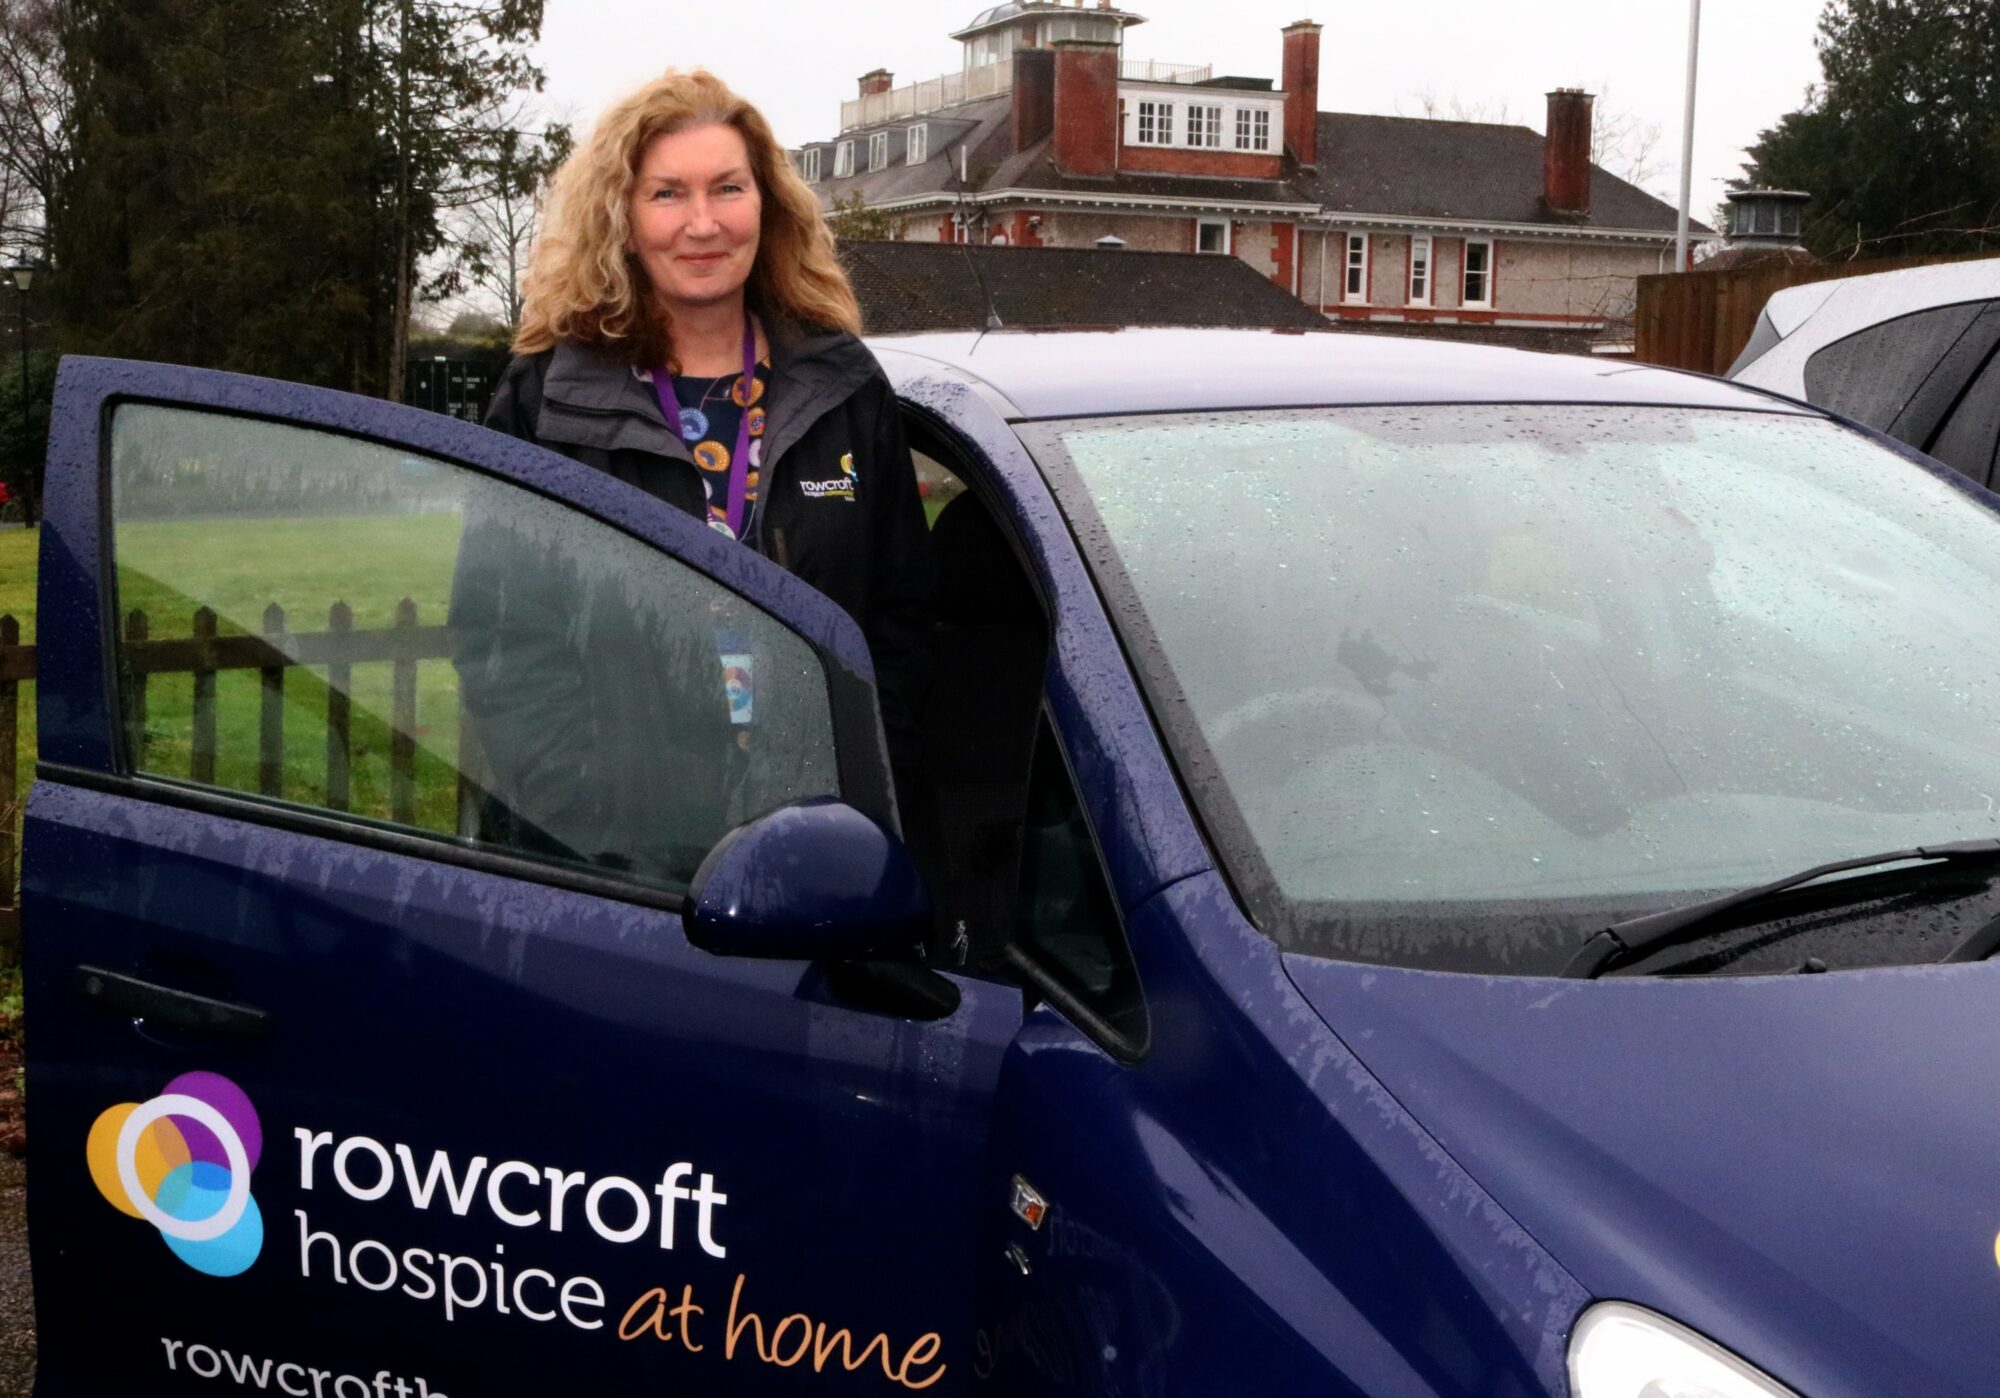 Clinical Nurse Specialist Julie Laing stood next to a Hospice branded car.